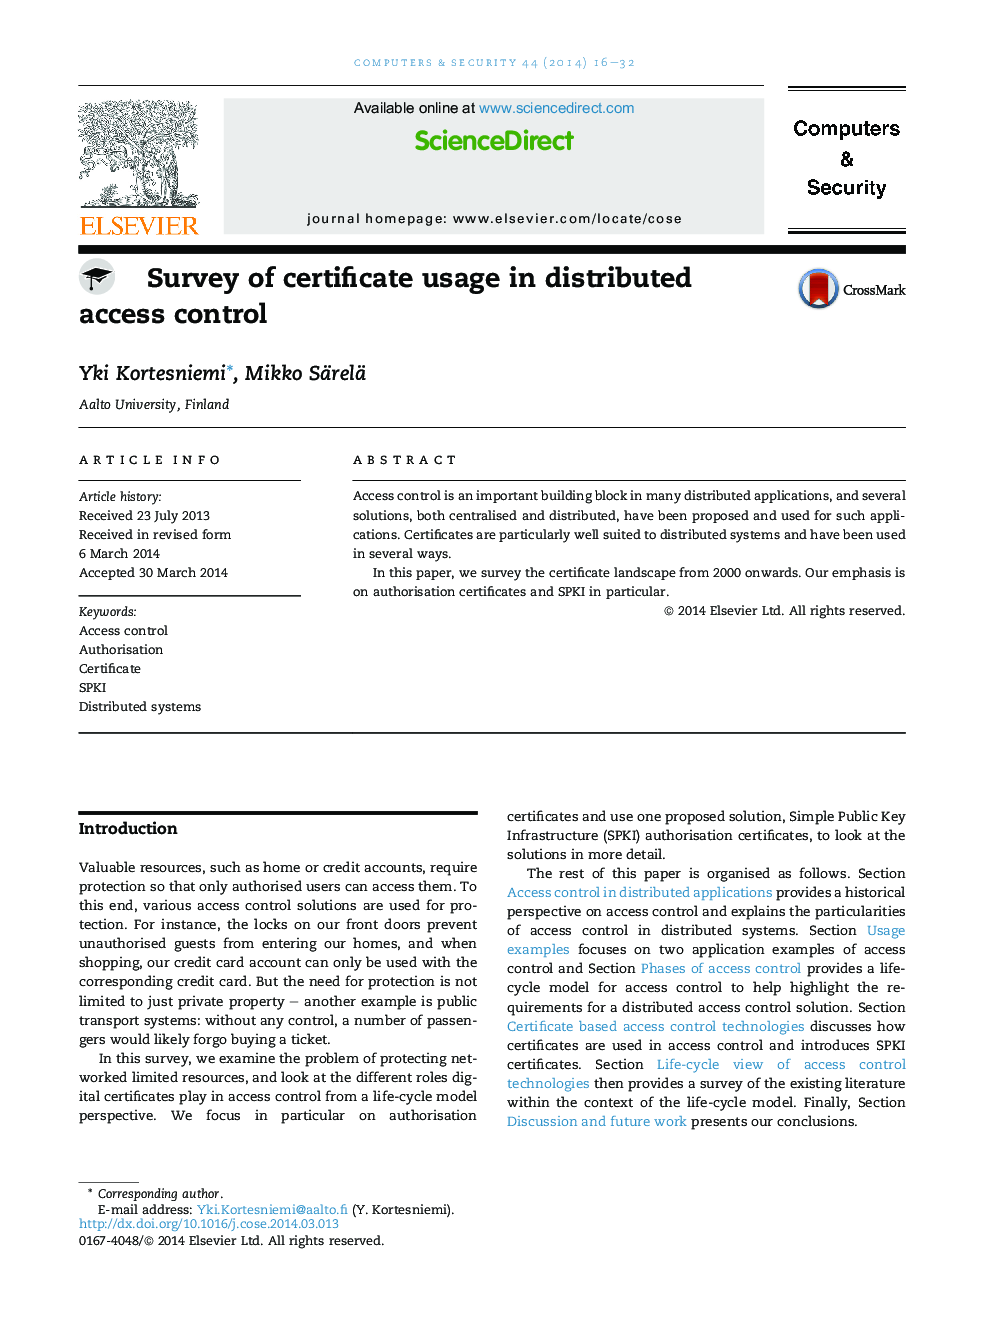 Survey of certificate usage in distributed access control